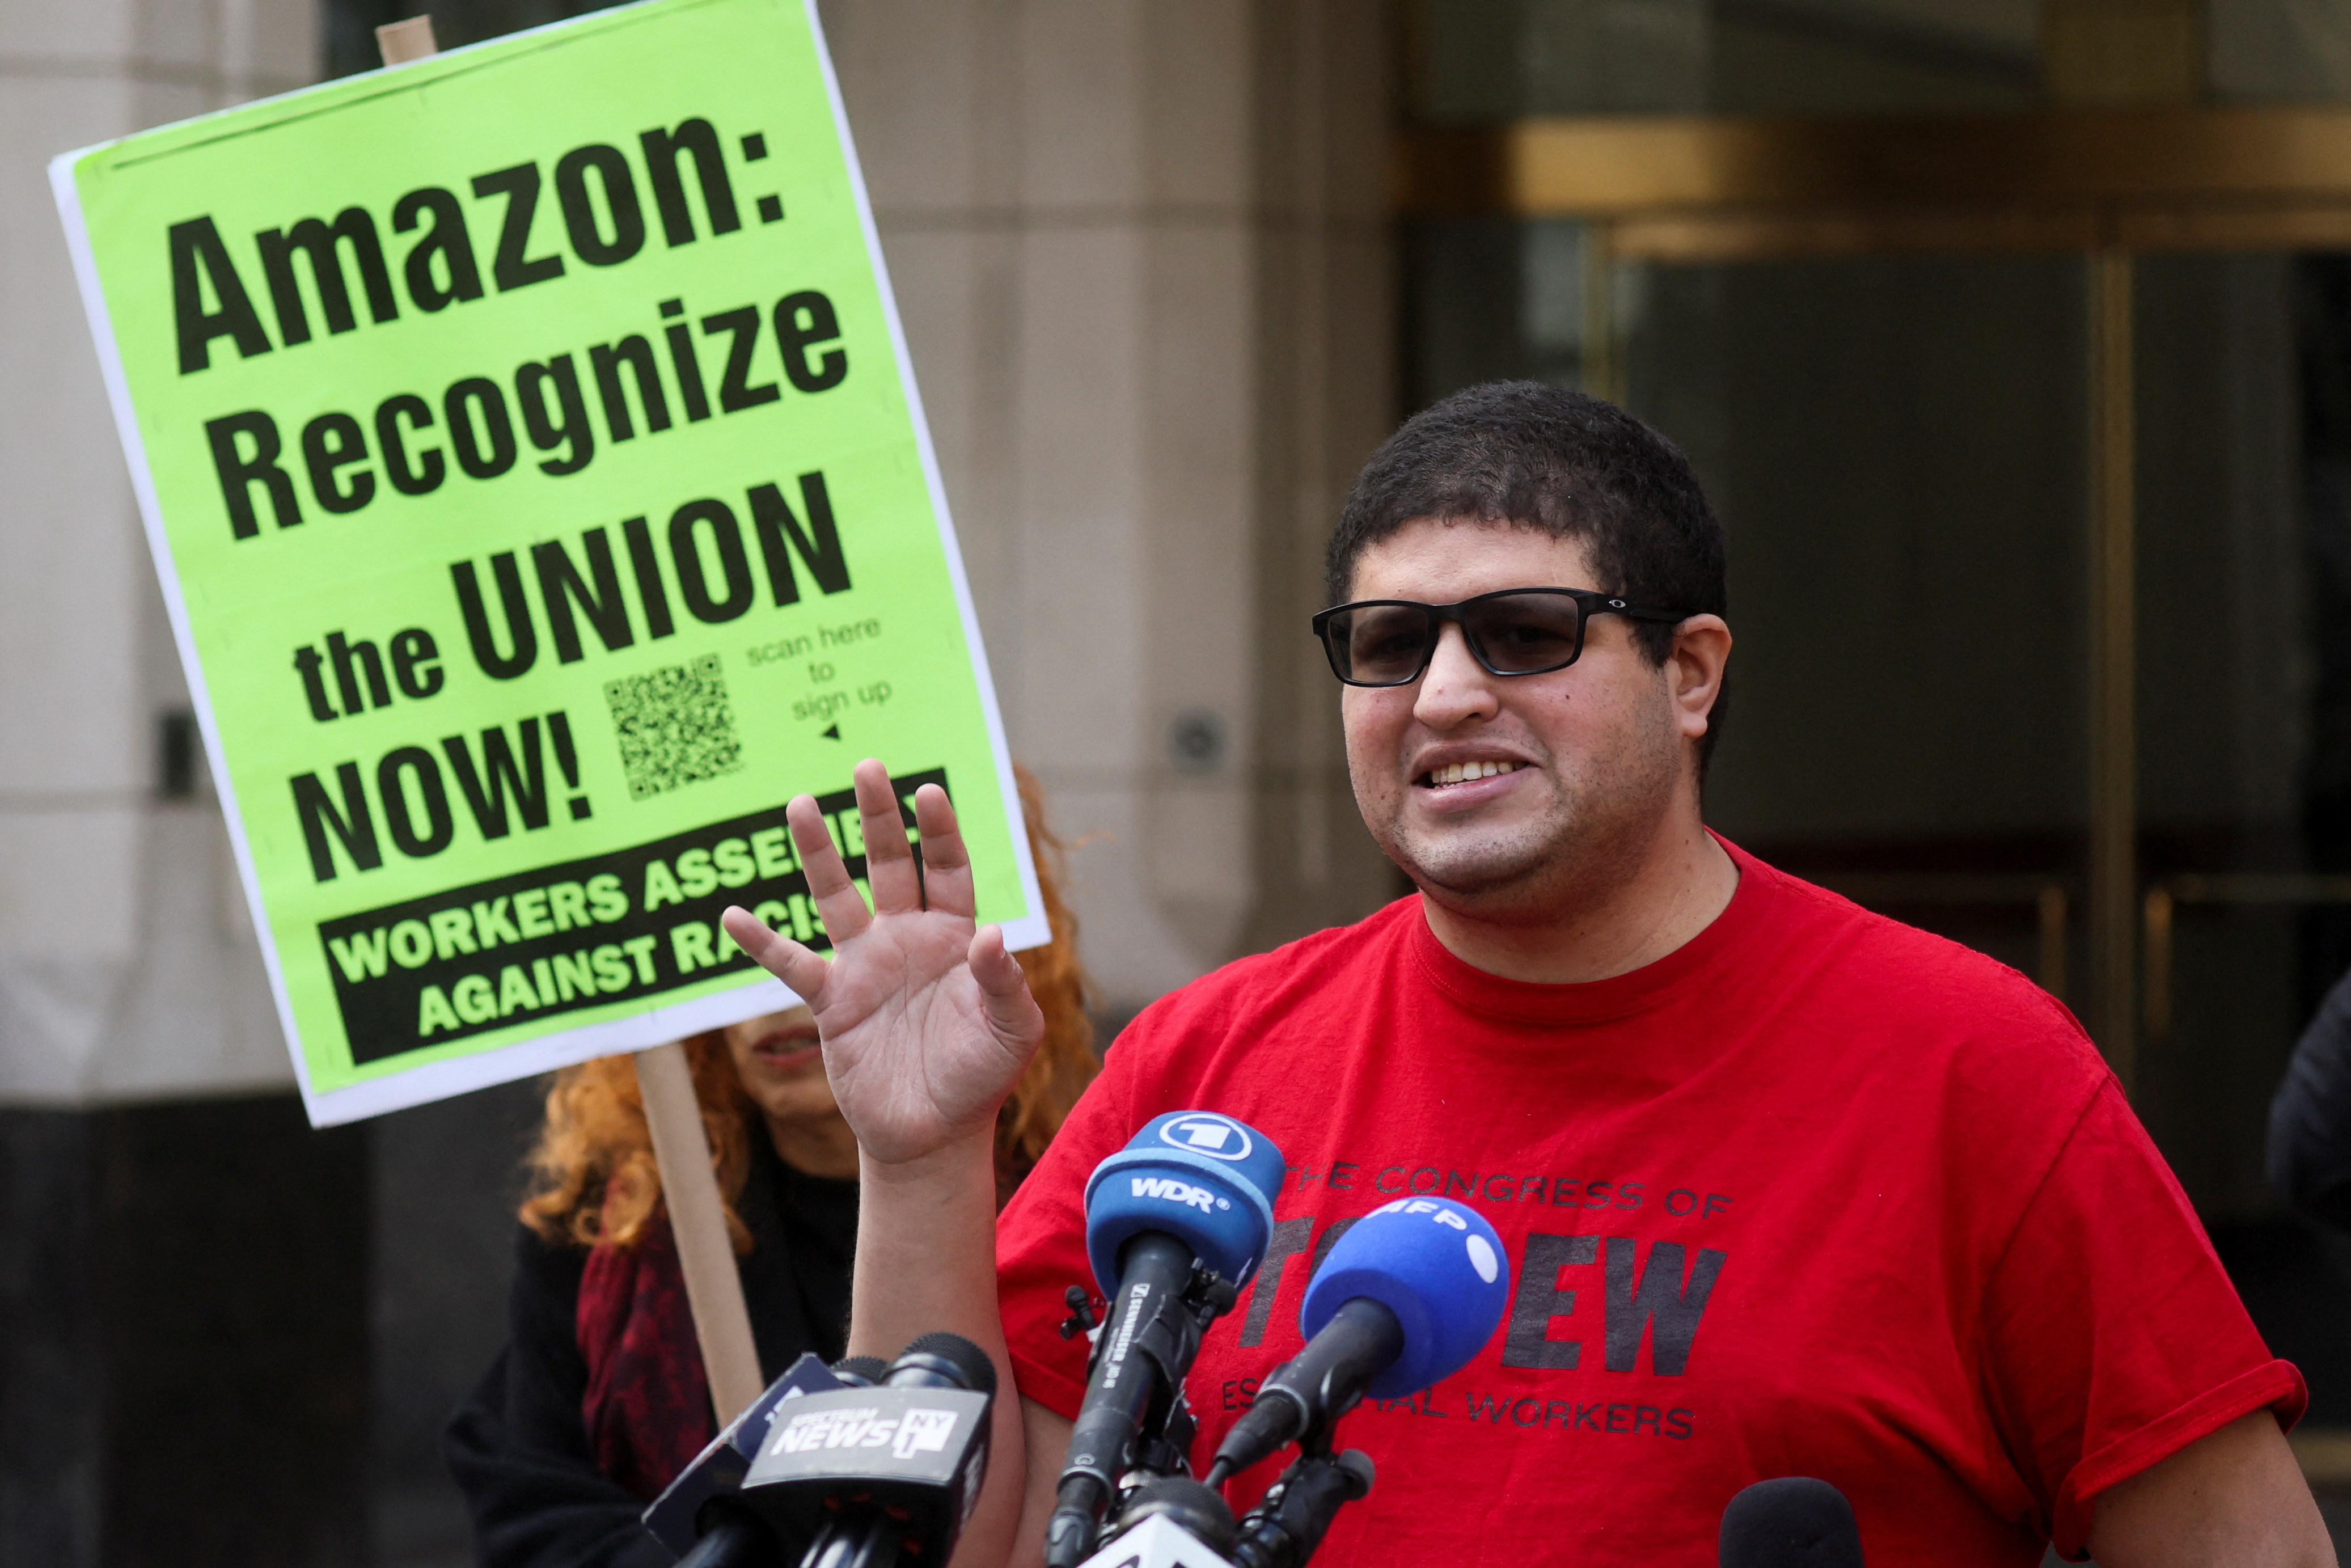 Amazon.com Inc workers react to the outcome of the vote to unionize, in Brooklyn